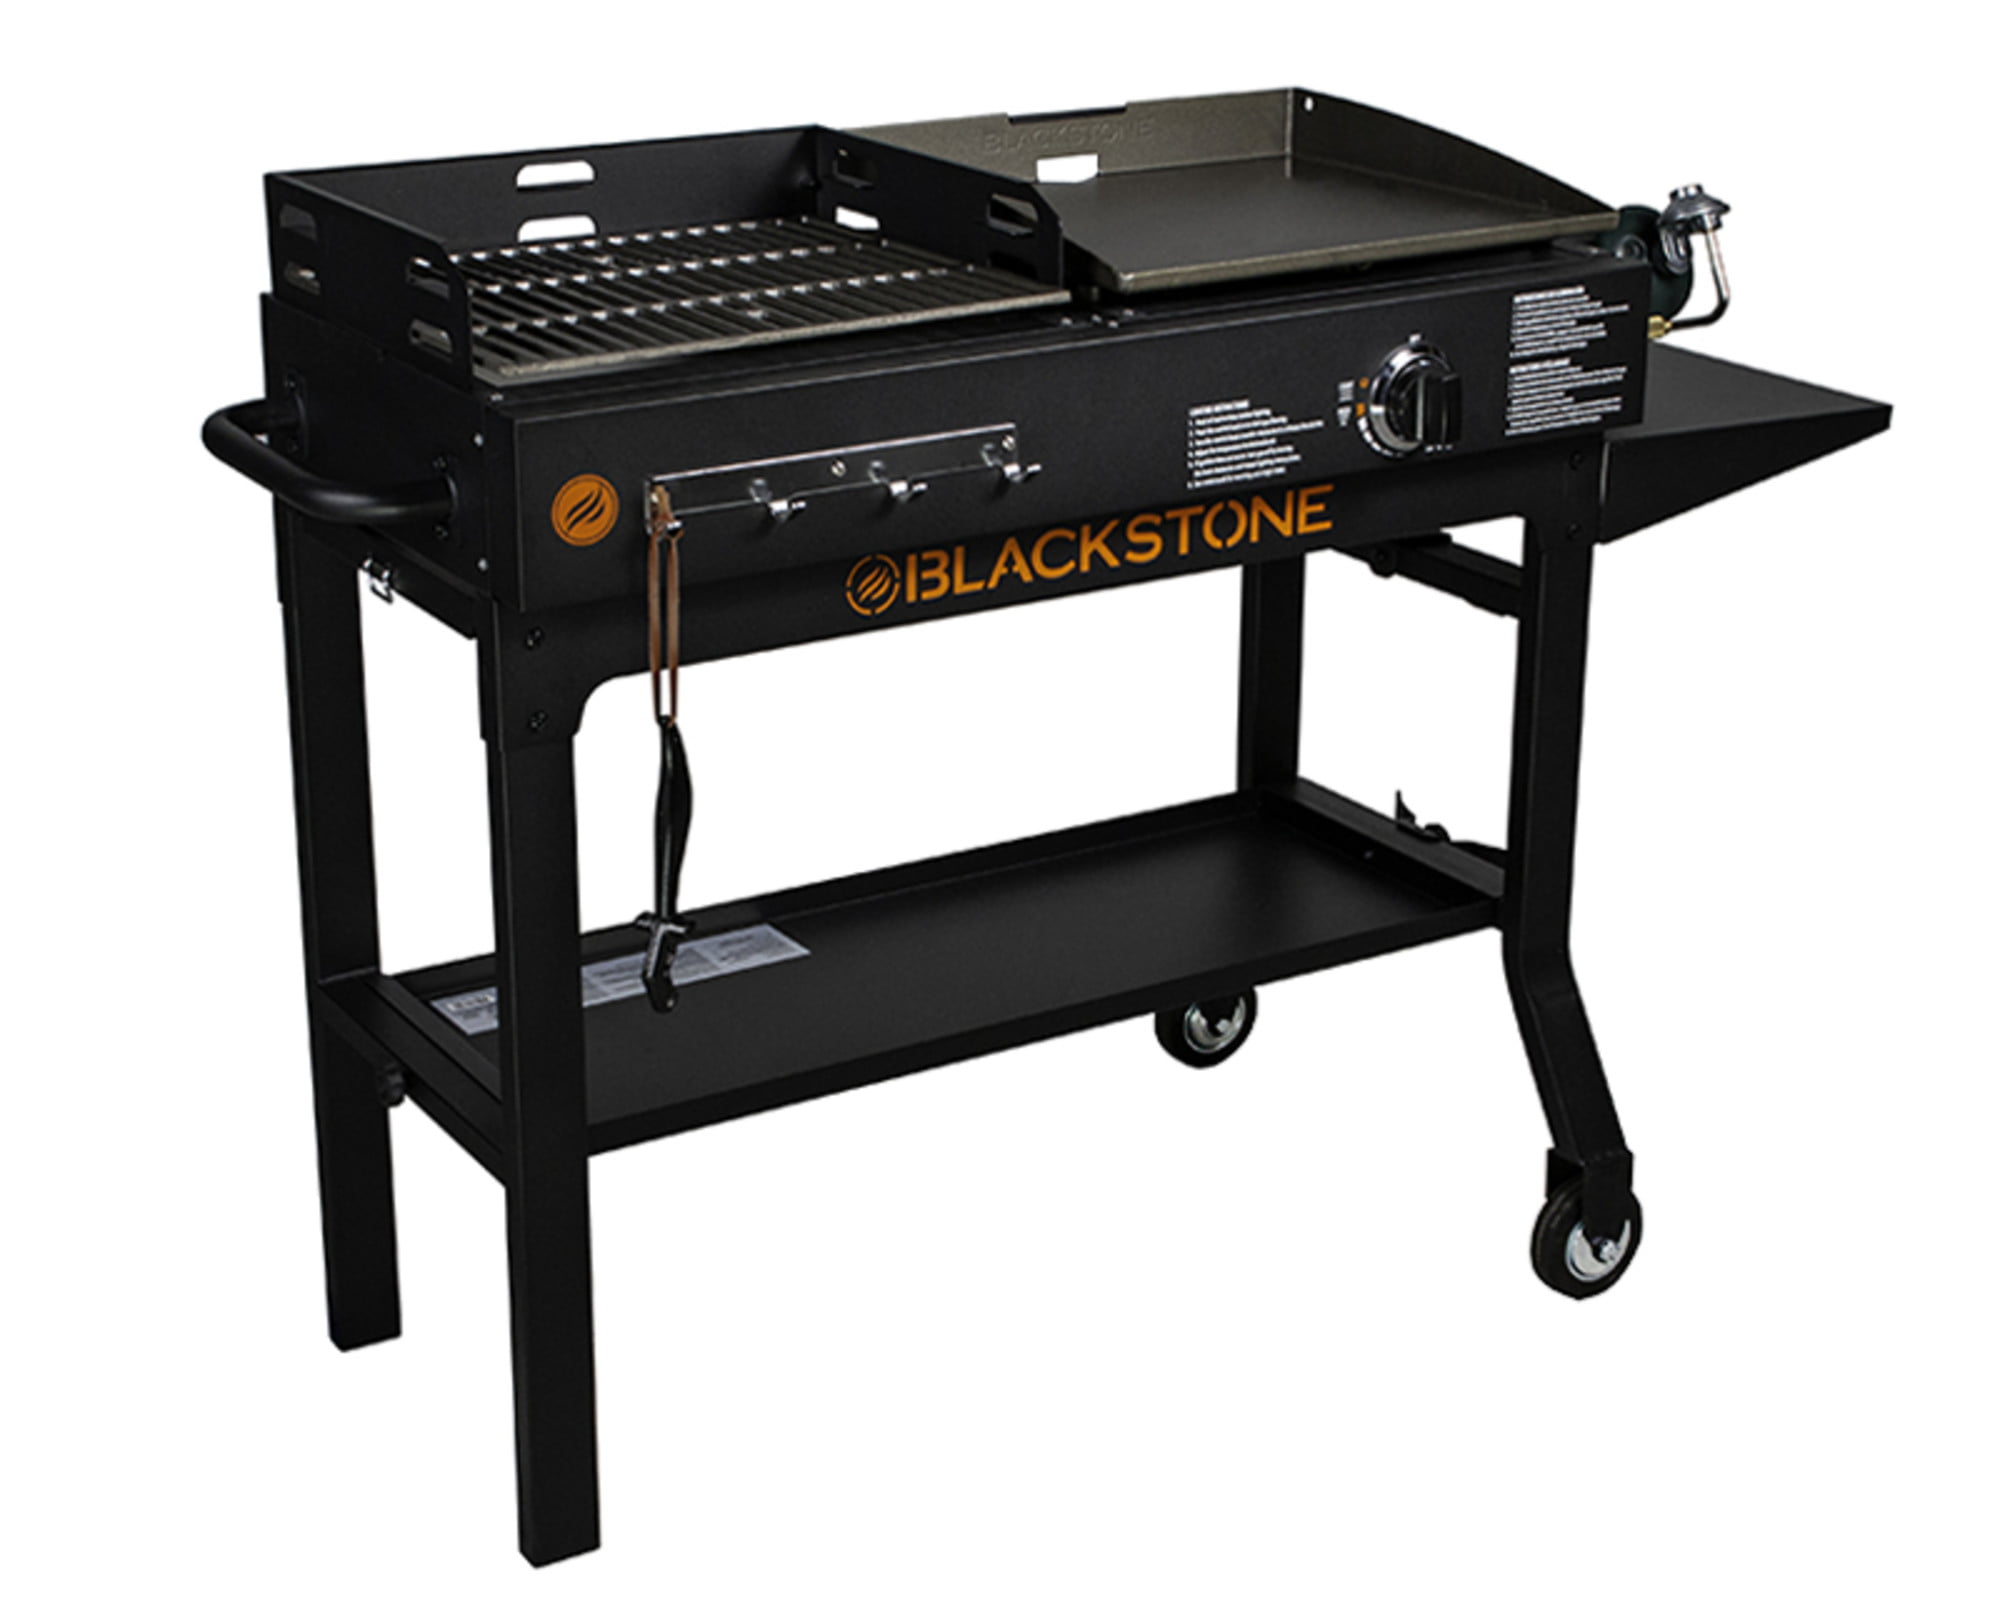 Griddle And Charcoal Grill Combo, Blackstone Liquid Propane Freestanding Outdoor Griddle With Lid